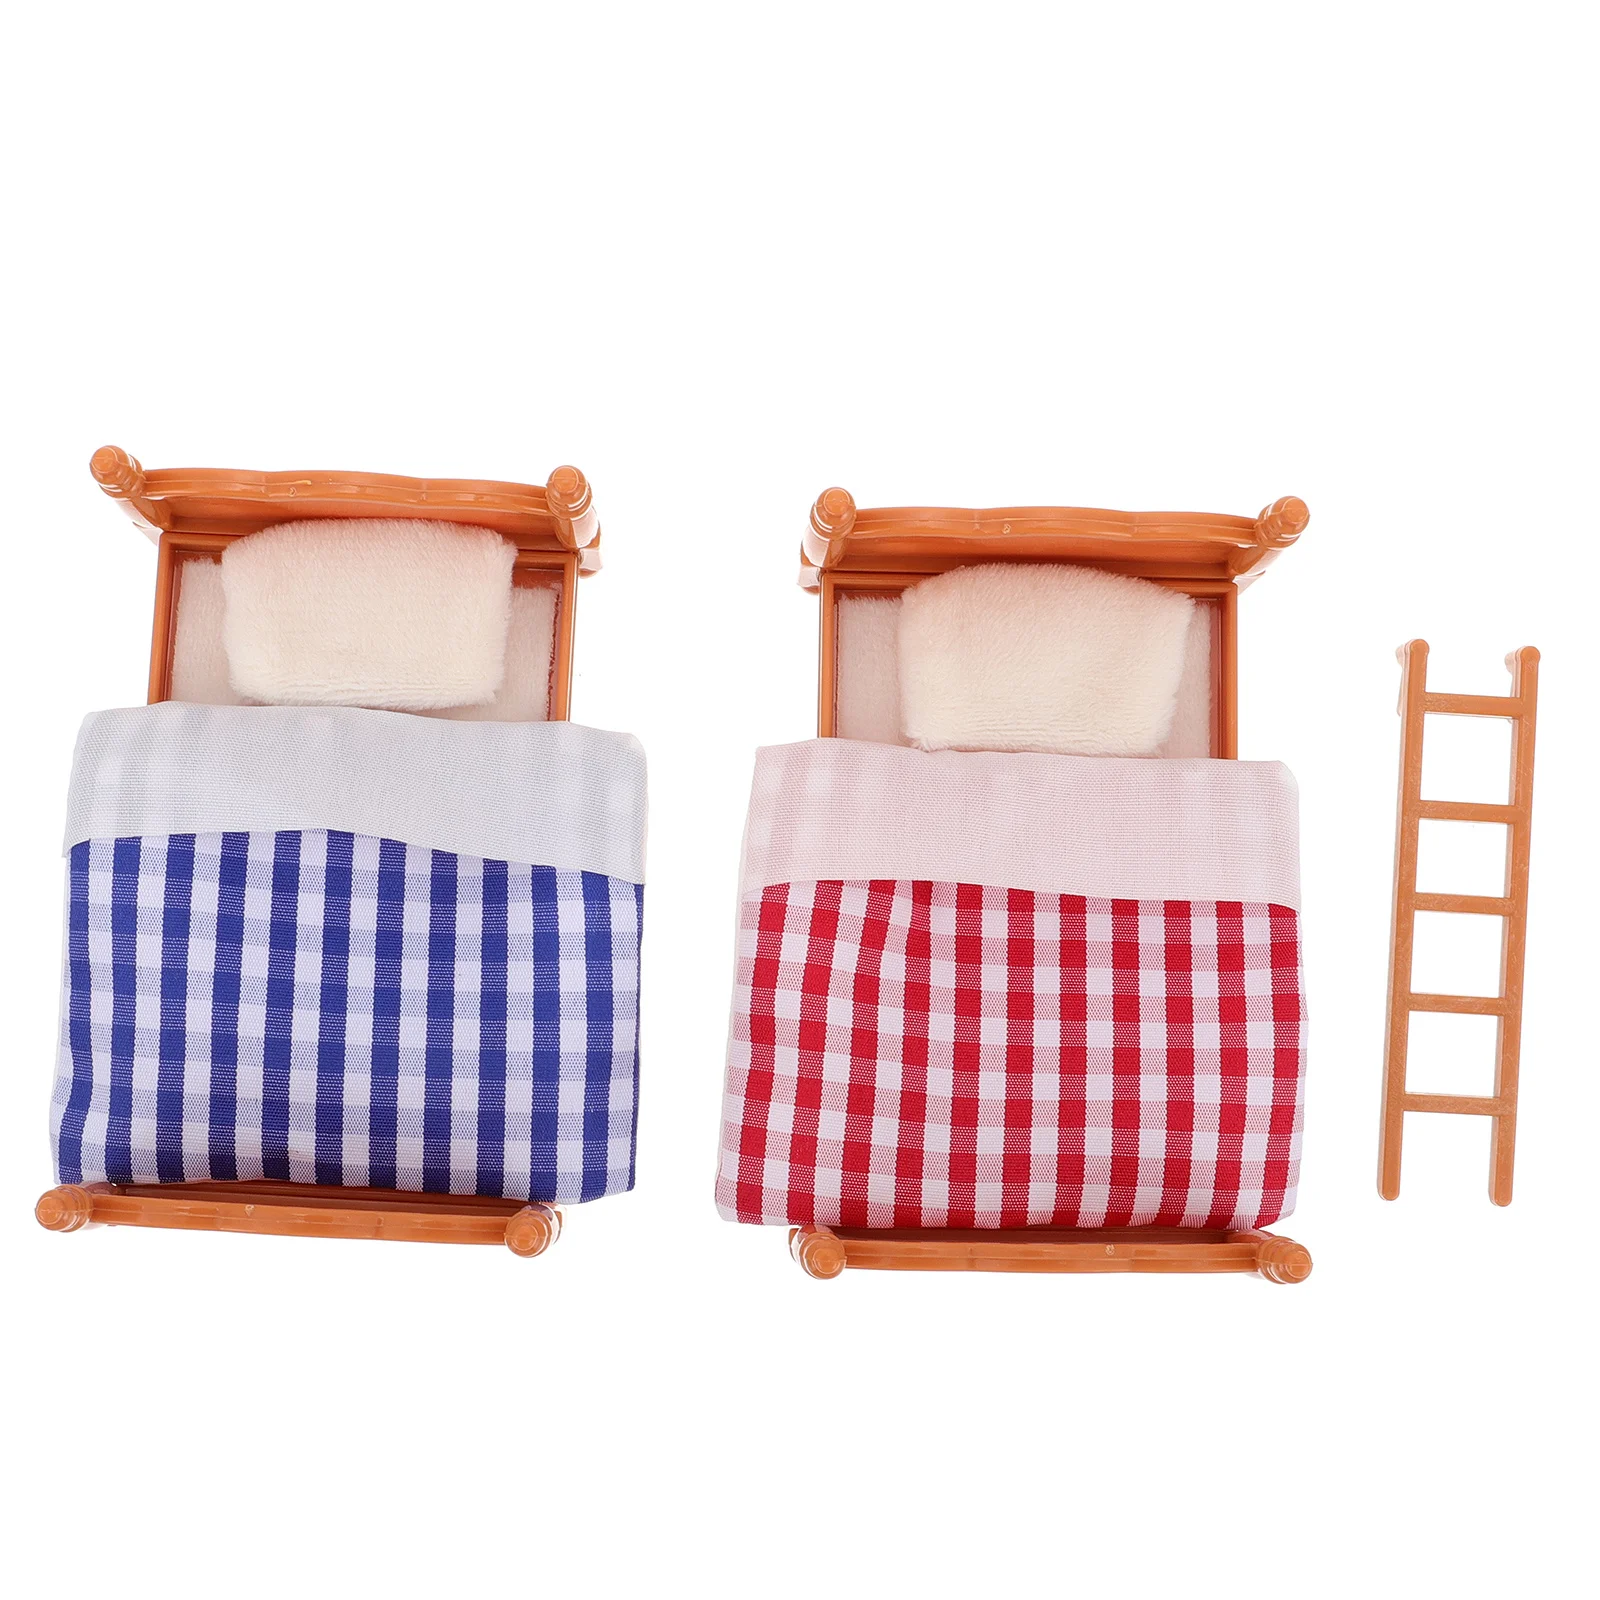 

Ornaments Mini Bed House Furniture Crib Bedding Babies Simulation Girl Twin Double Beds